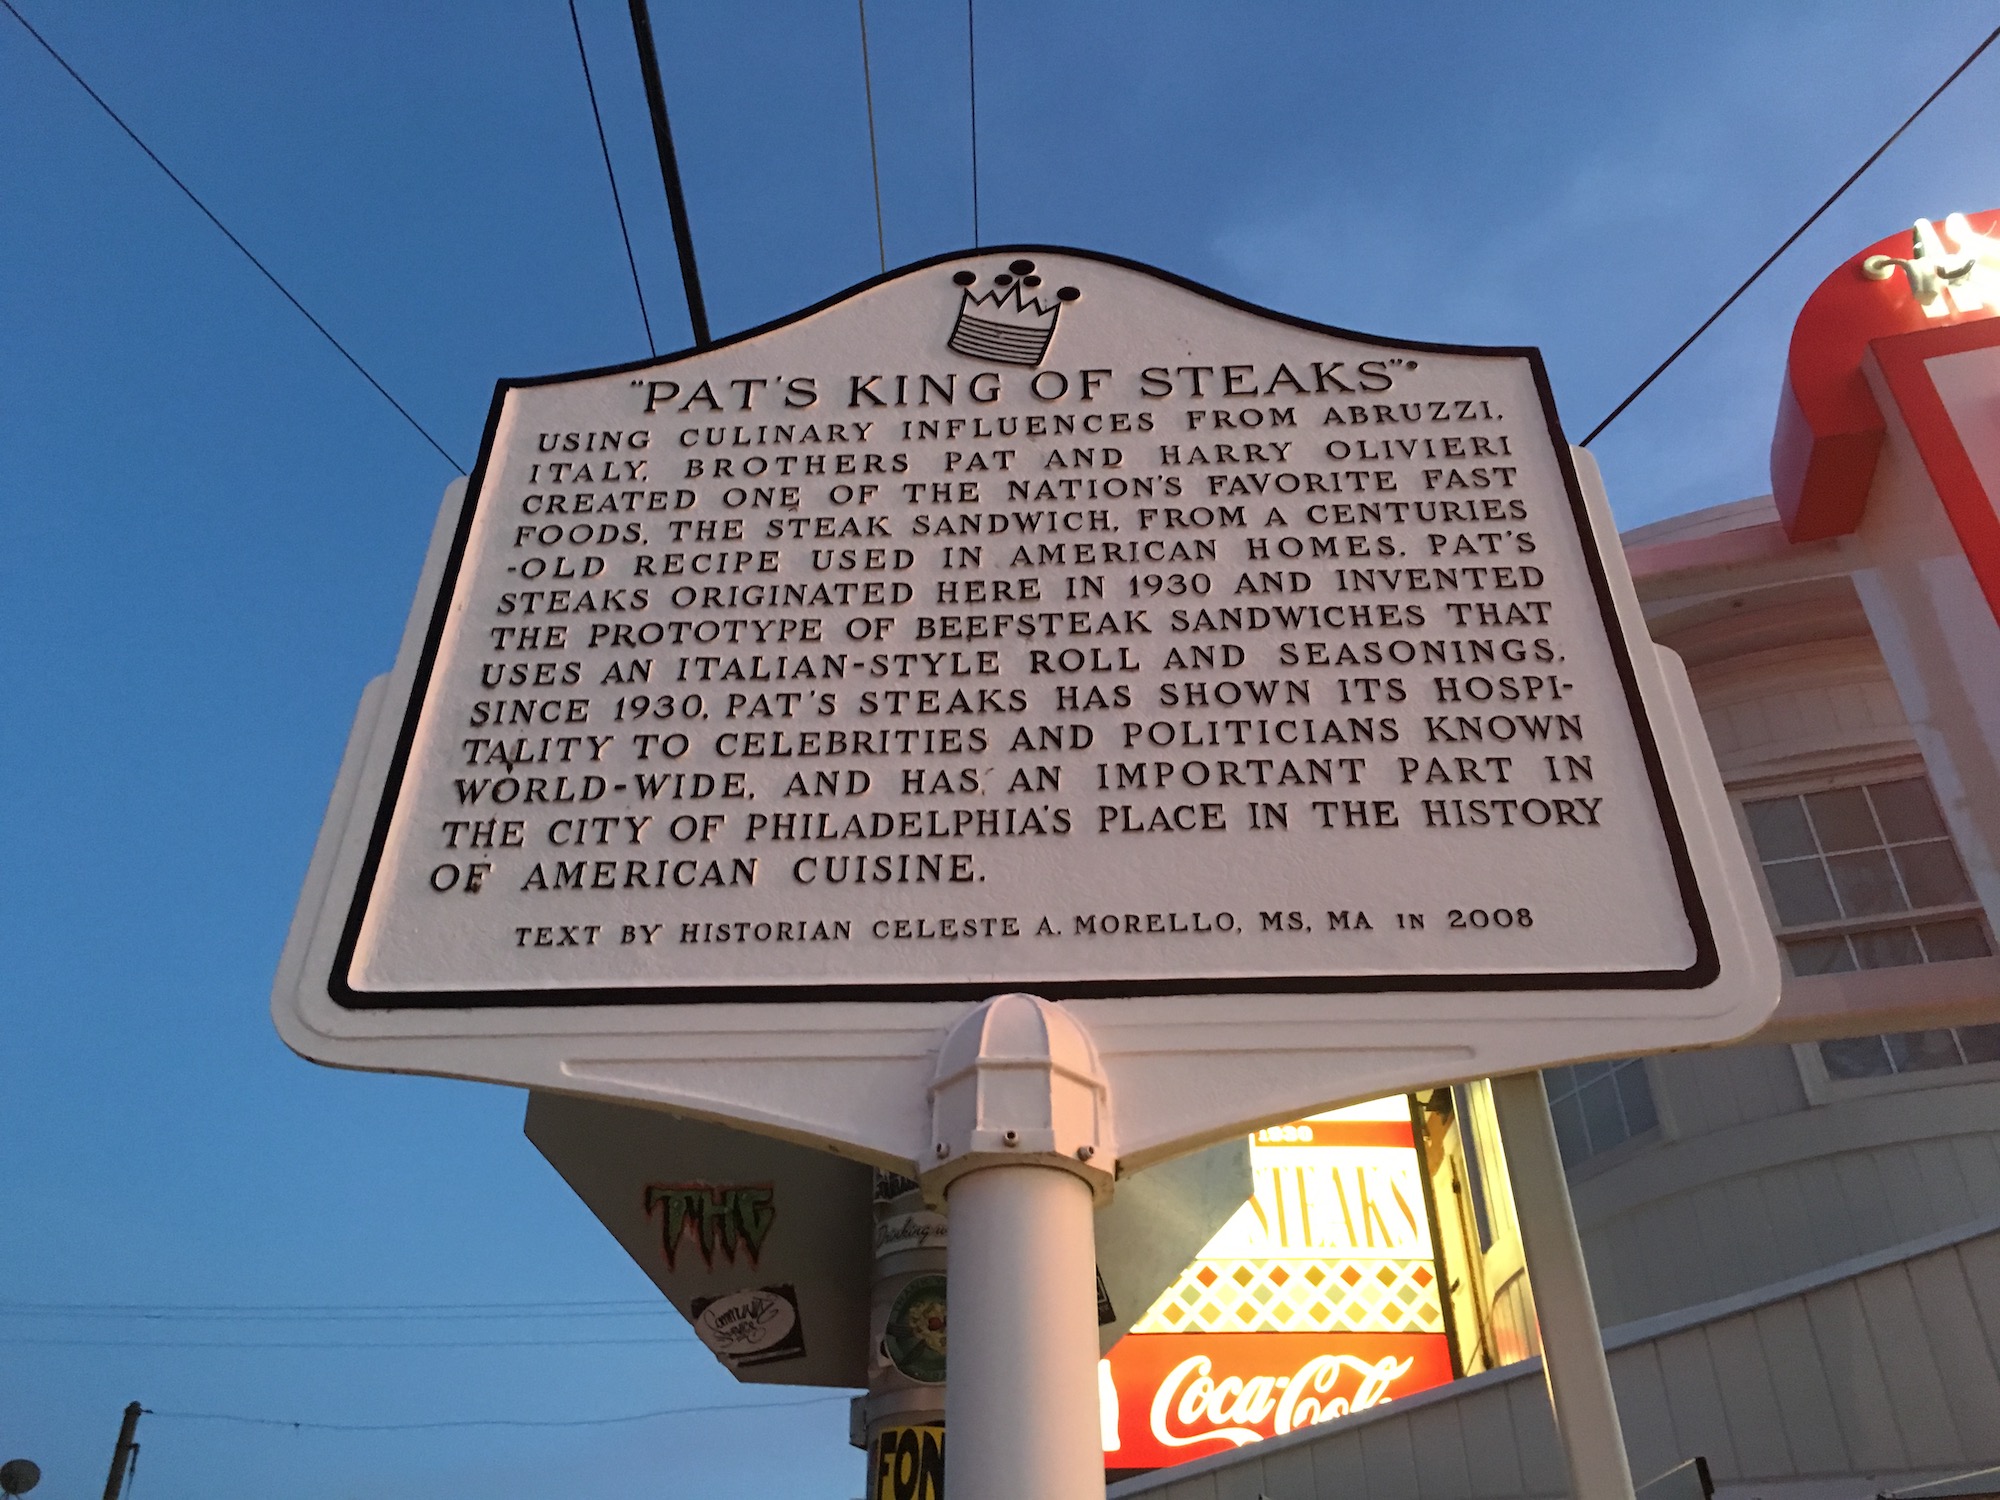 Pats King of Steaks Historical Marker